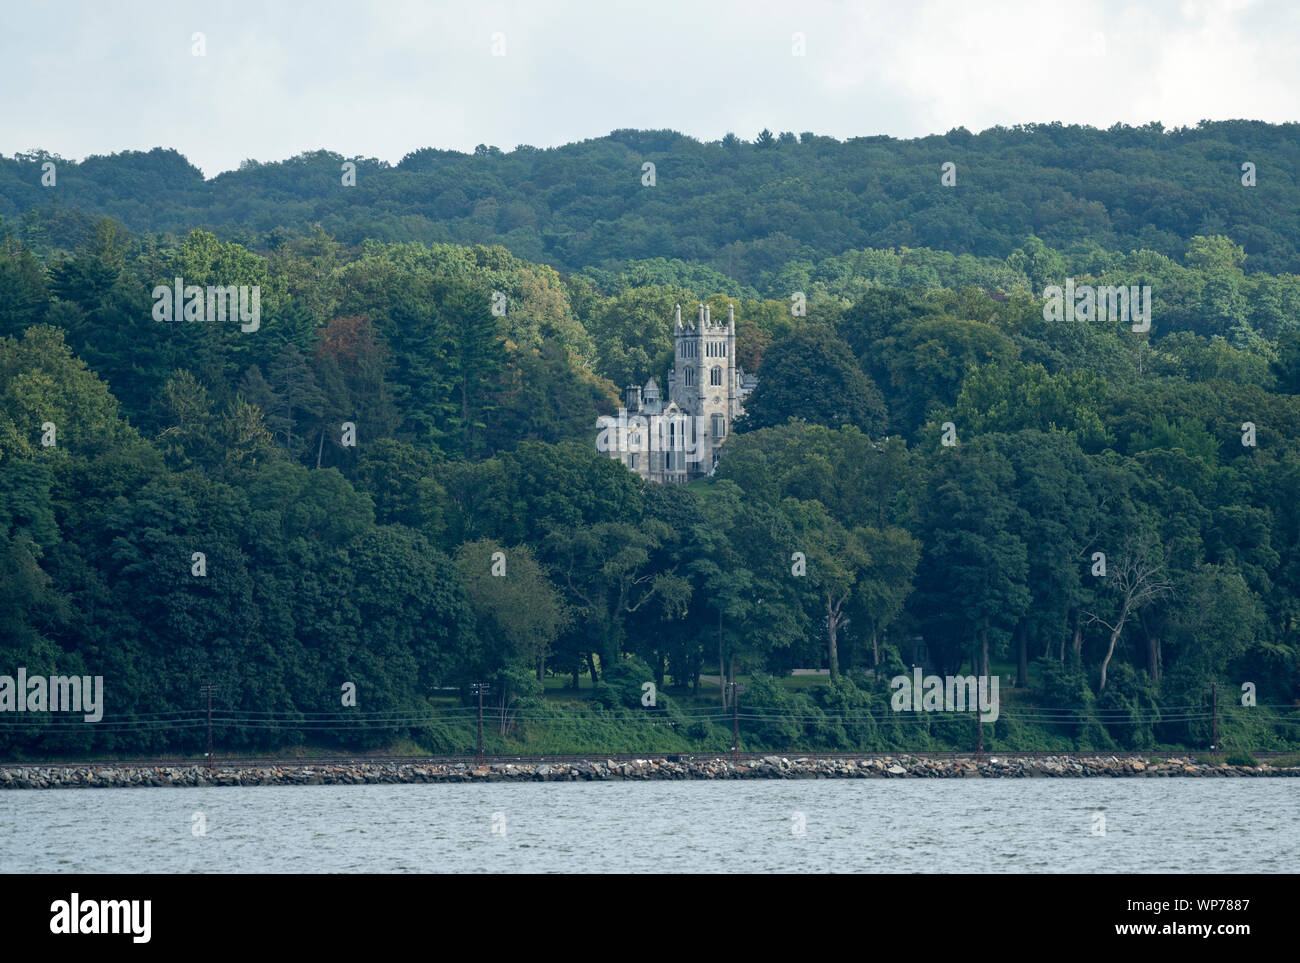 Lyndhurst, a Gothic Revival country house overlooking the Hudson River in Tarrytown, New York, was designed in 1838 by Alexander Jackson Davis. Stock Photo